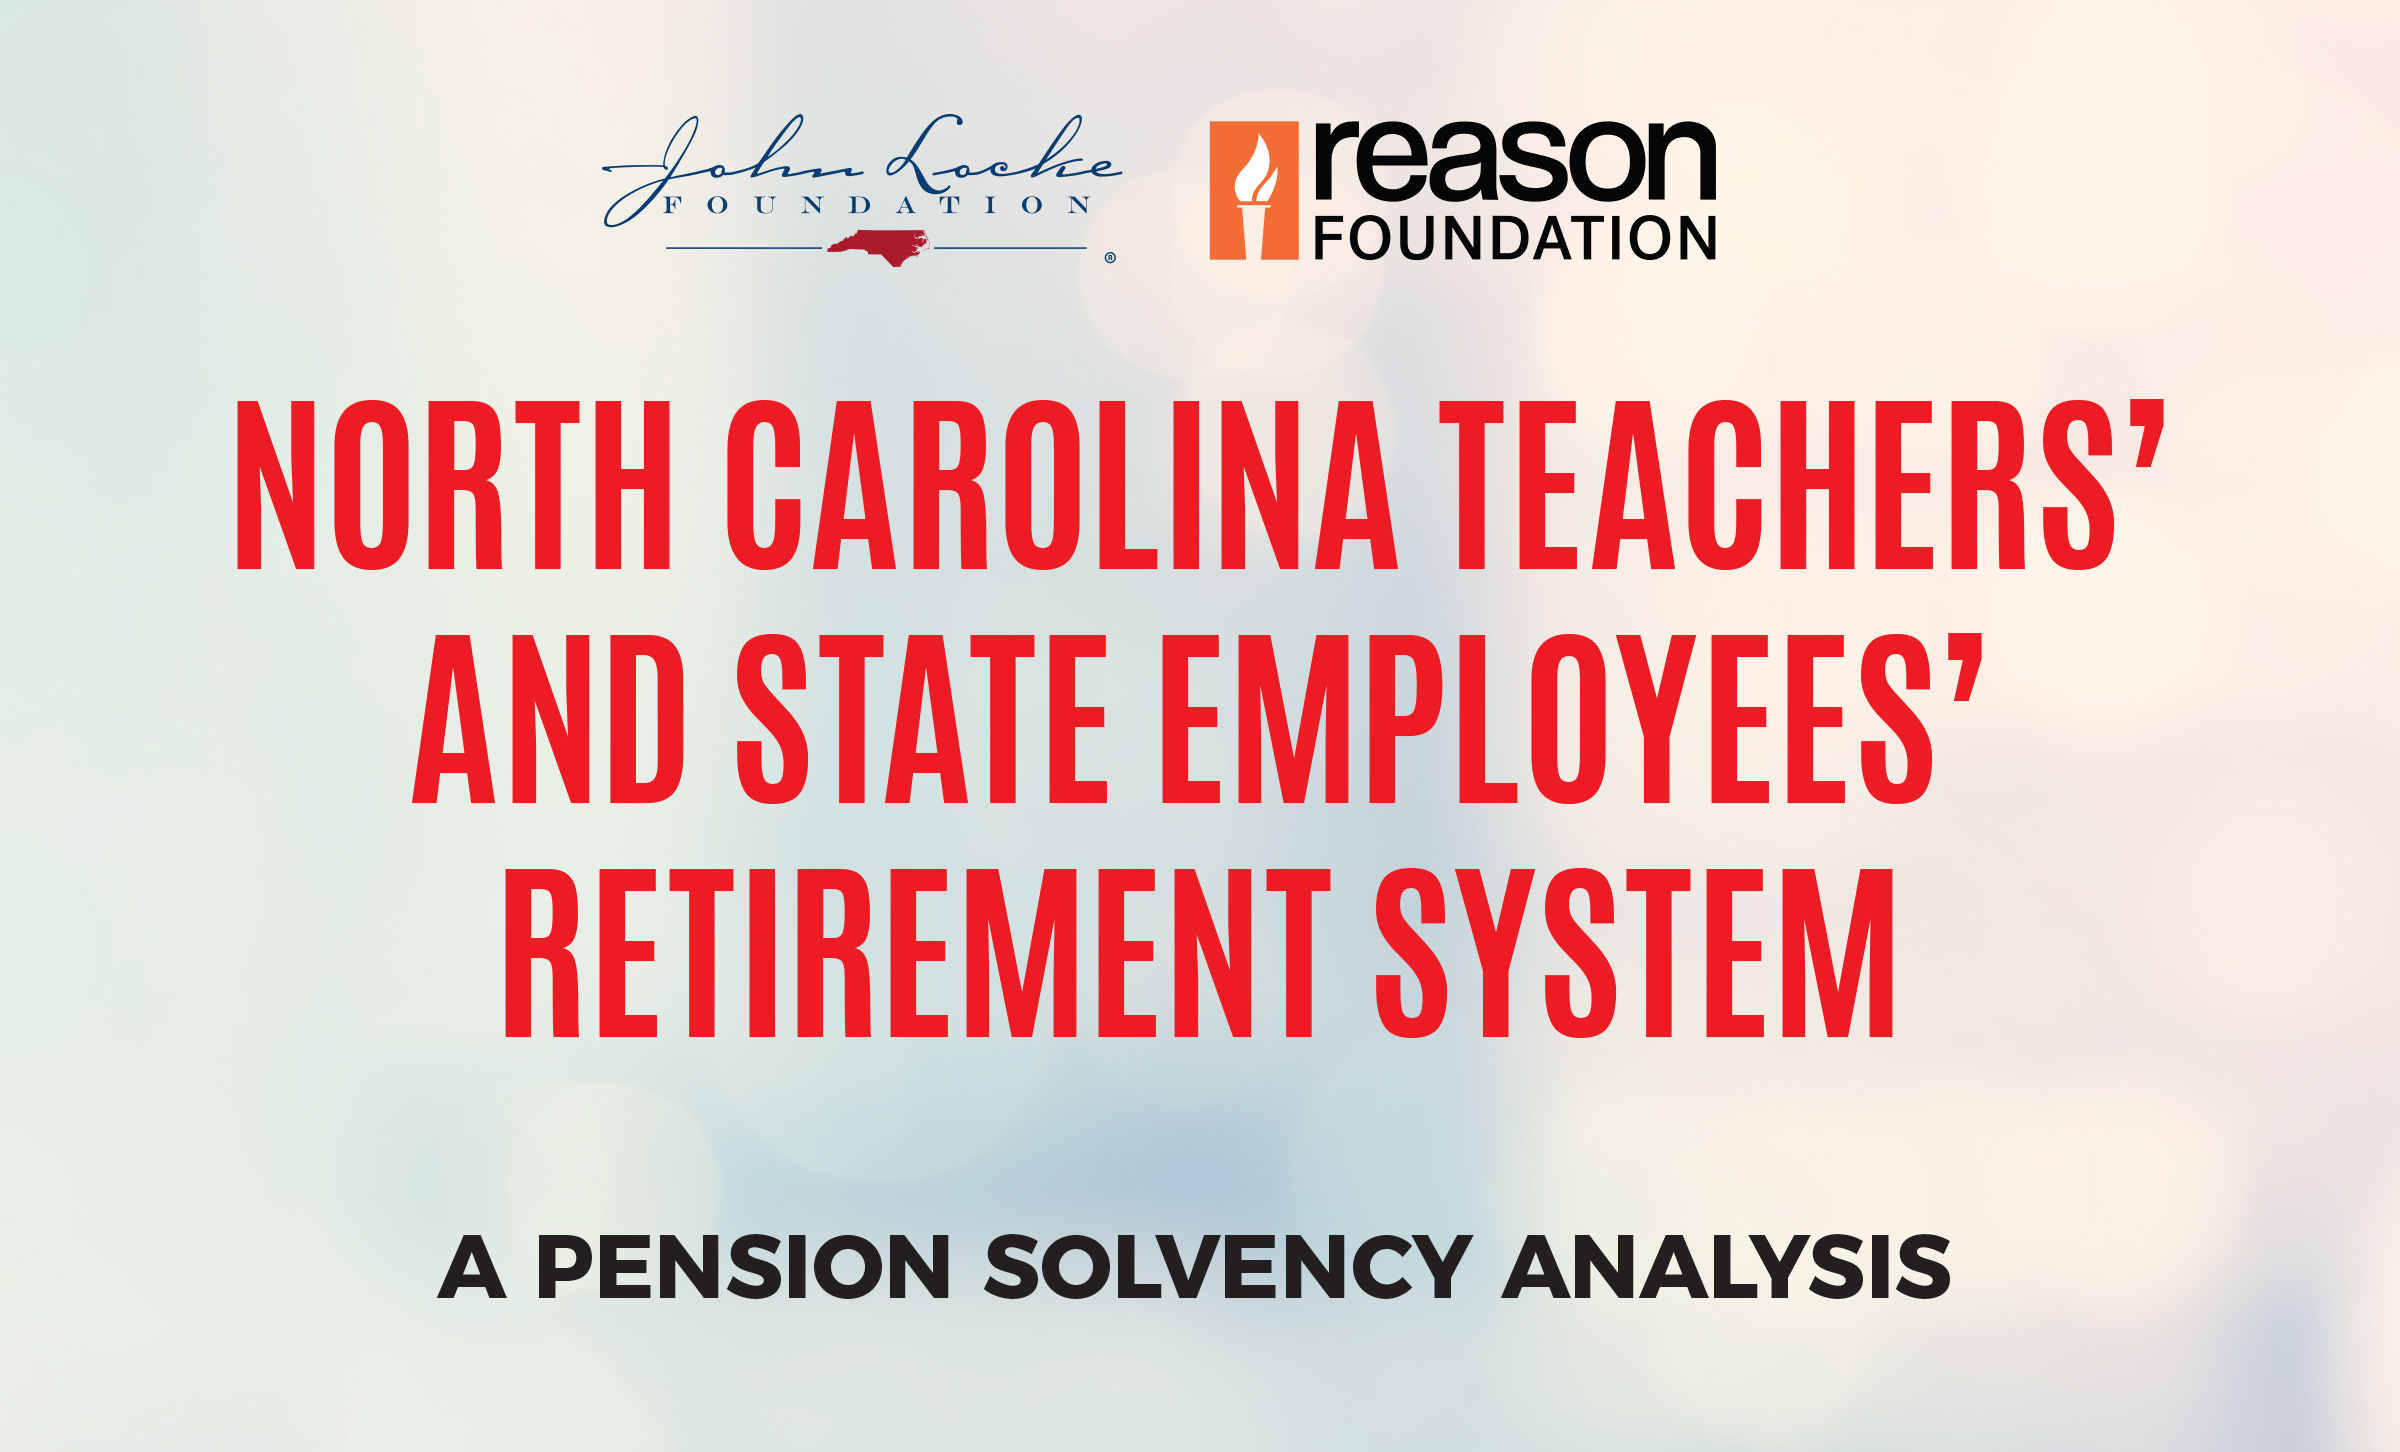 North Carolina Teachers’ and State Employees’ Retirement System